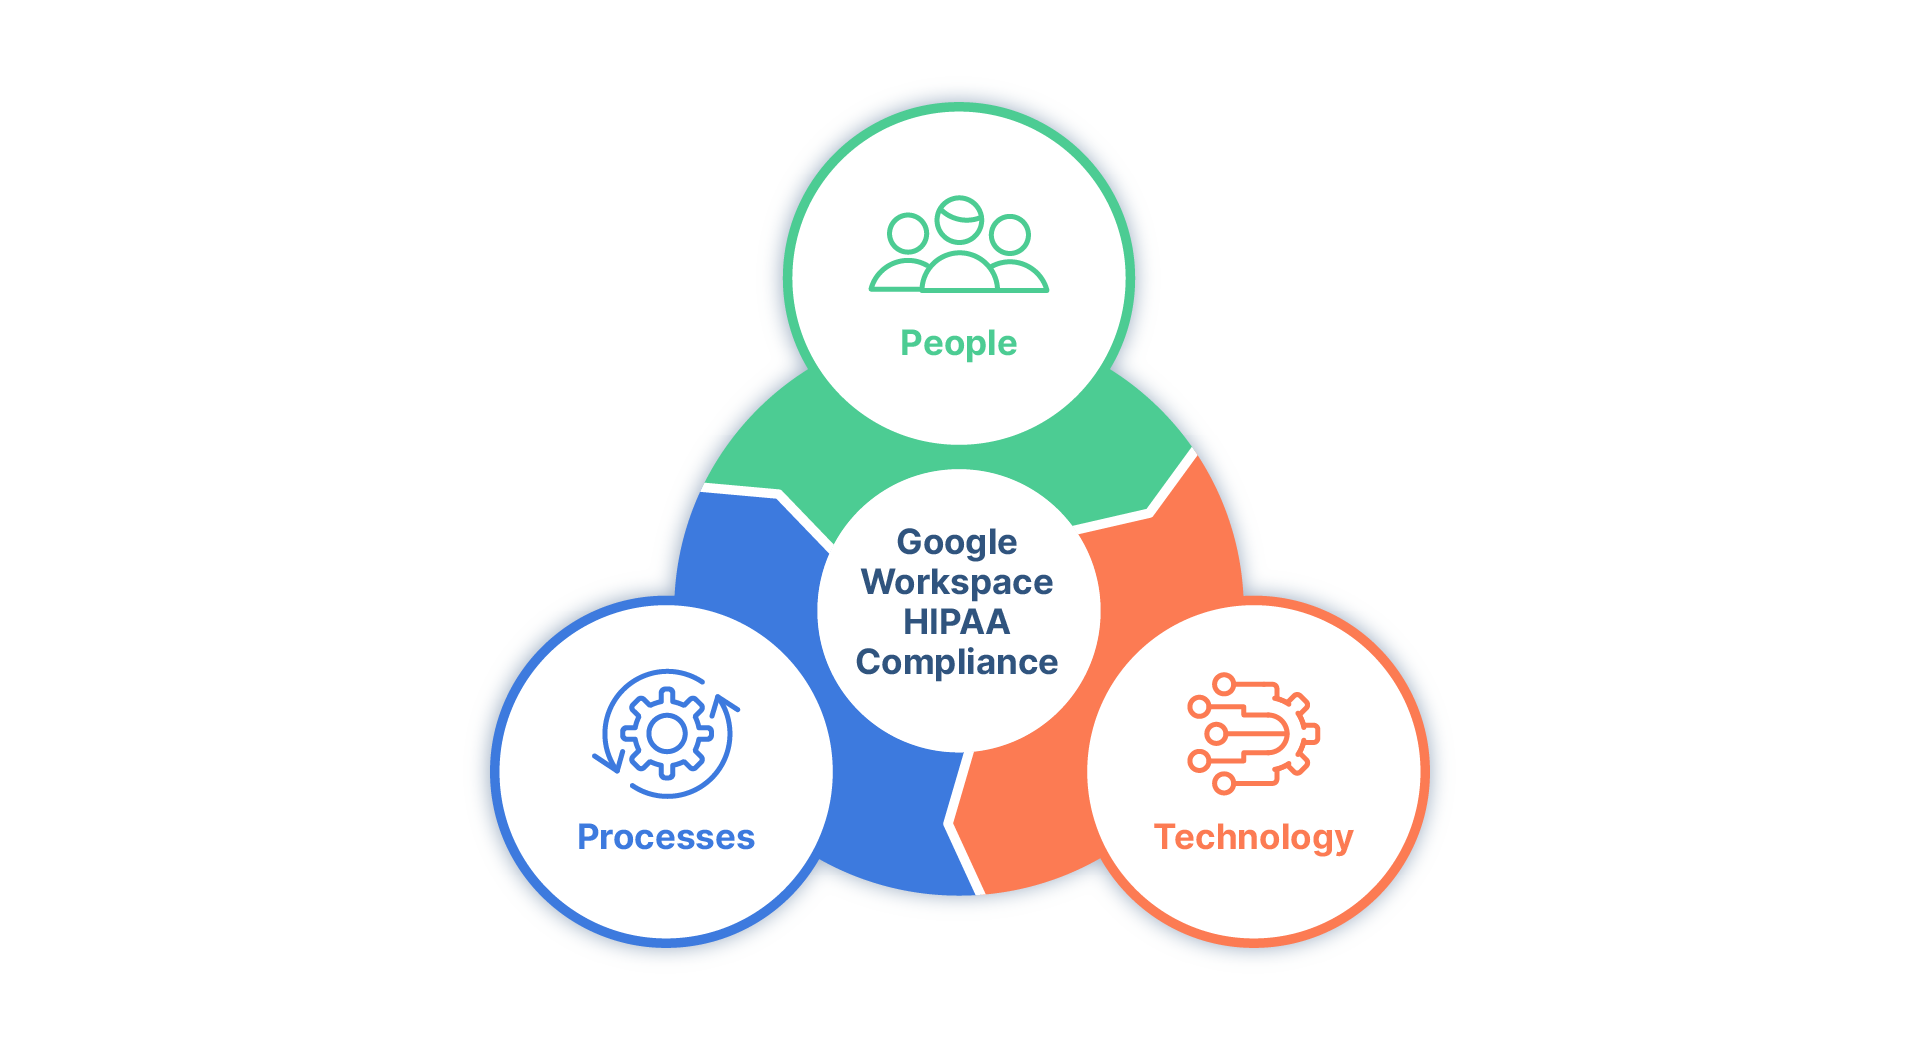 How to achieve HIPAA compliance in Google Workspace
